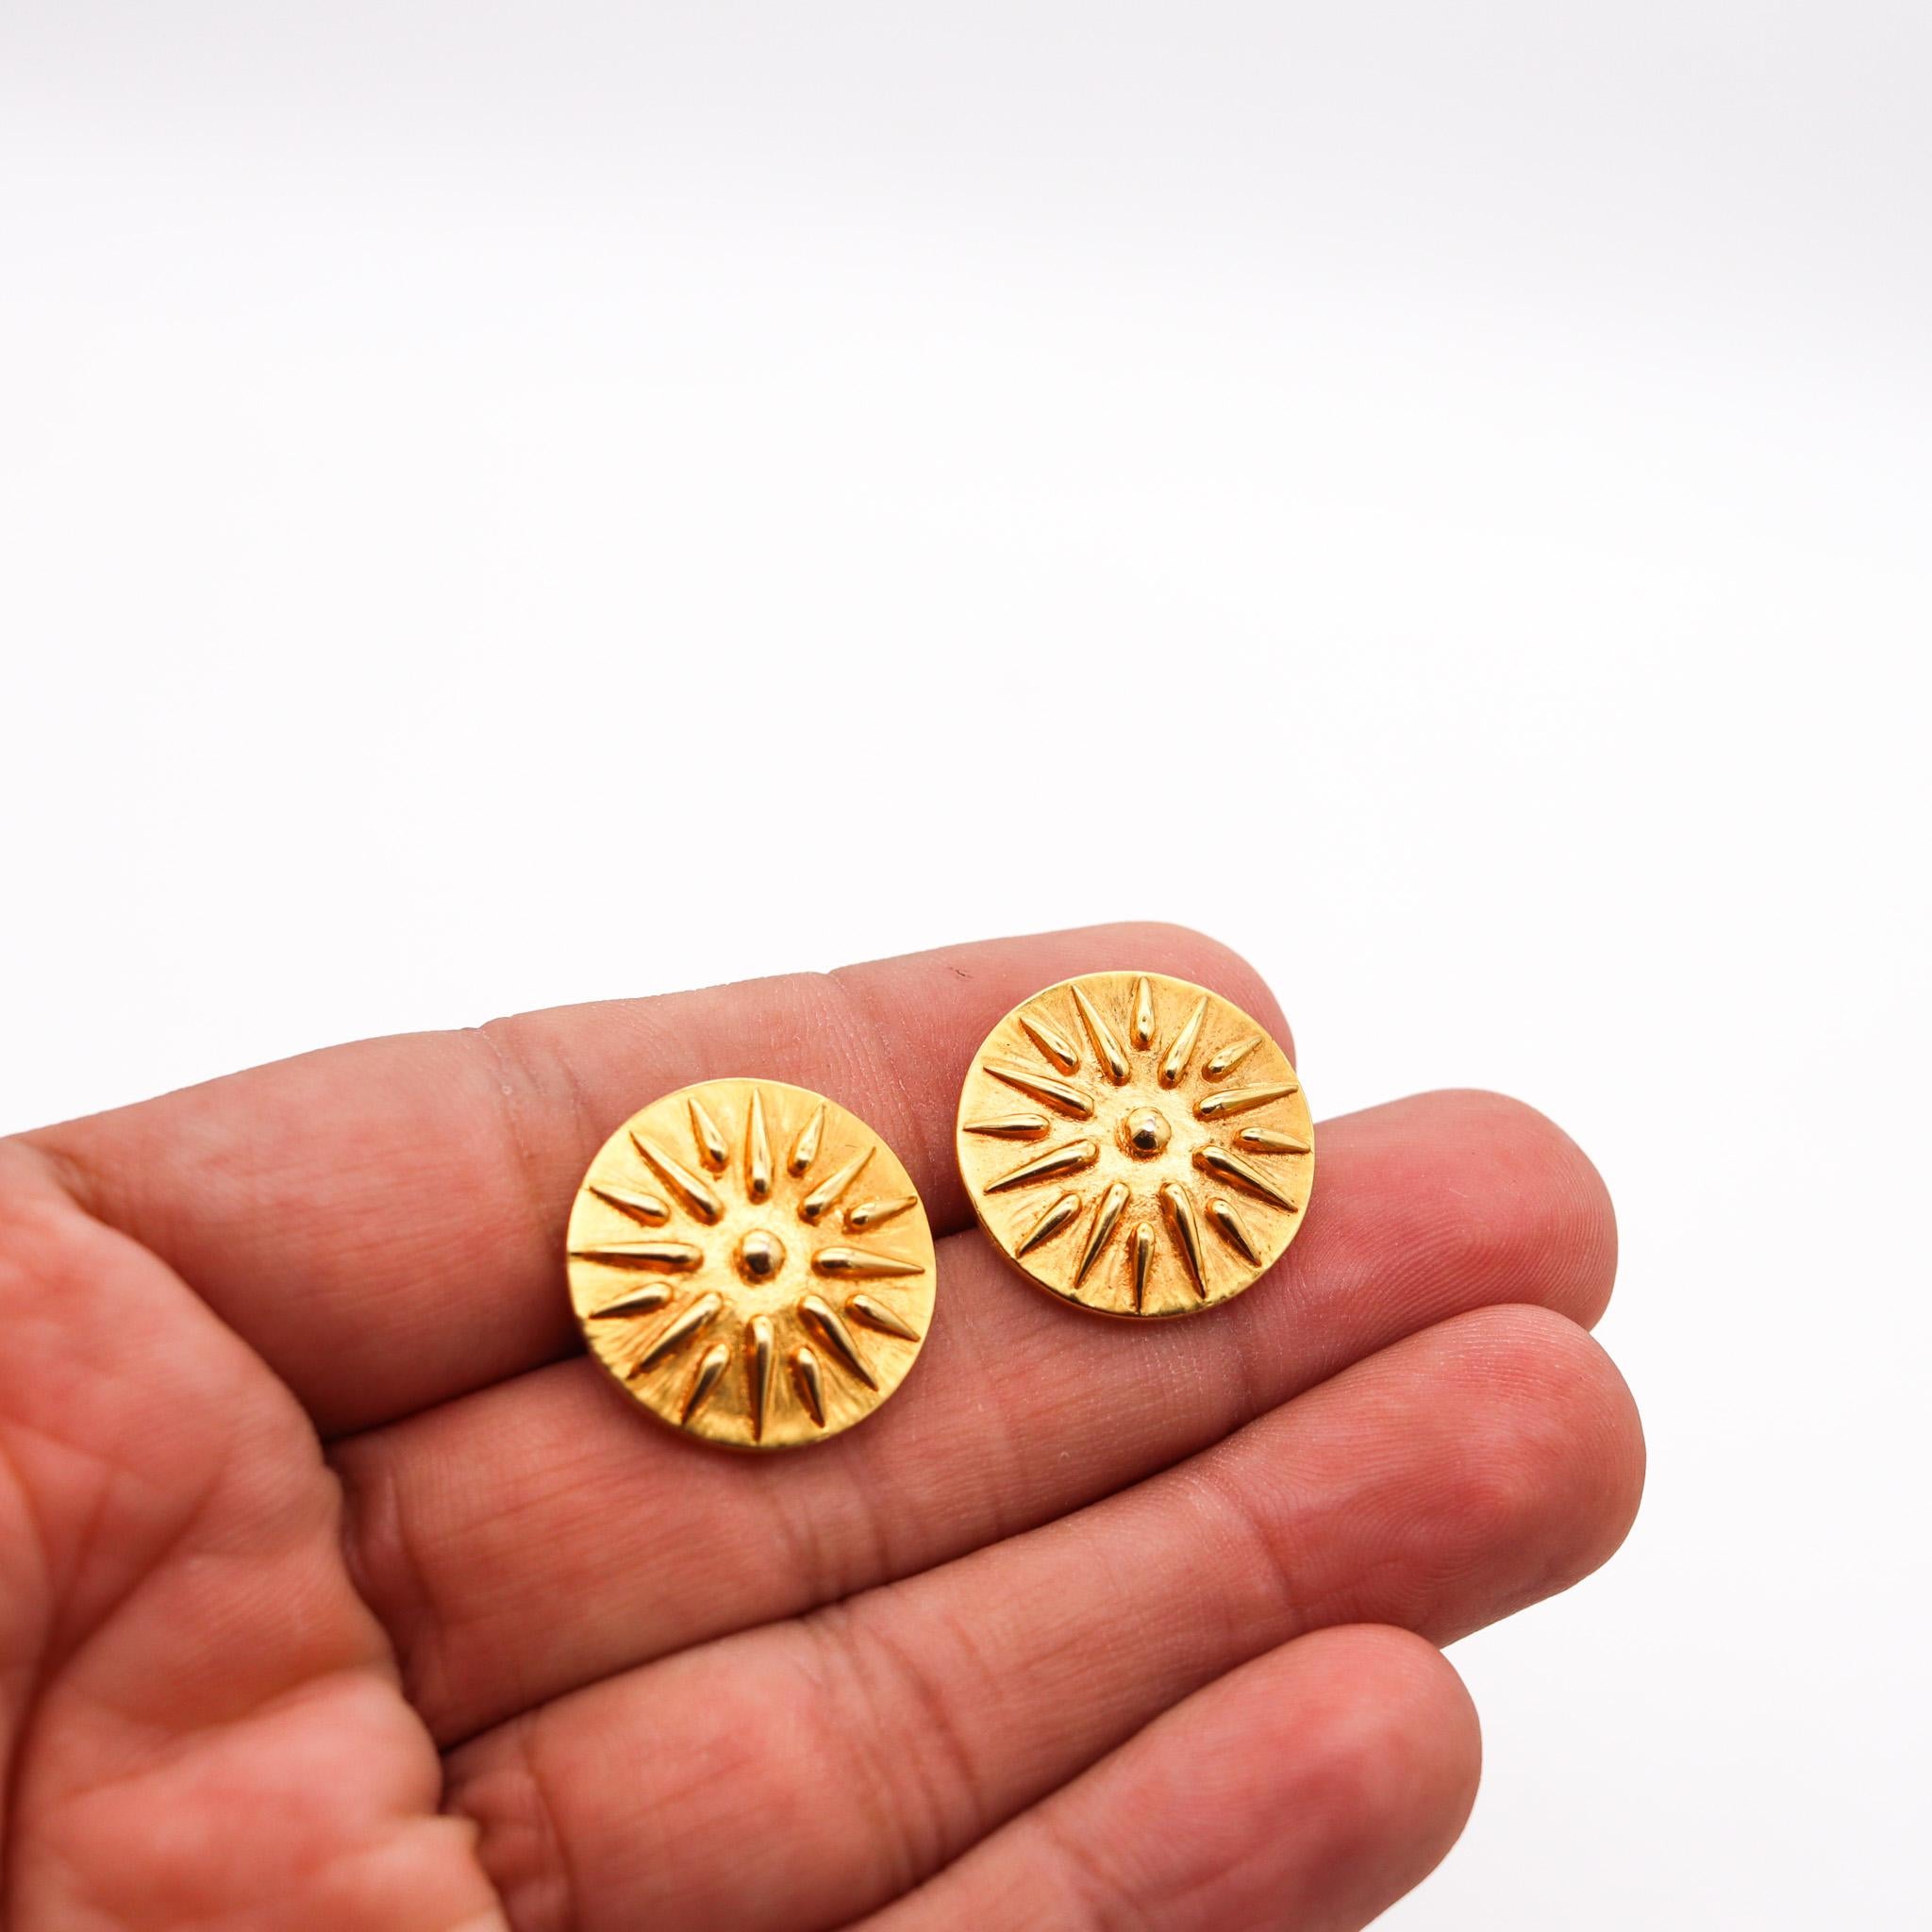 Zolotas Greece Round Sunburst Studs Earrings in Solid 18Kt Yellow Gold In Excellent Condition For Sale In Miami, FL